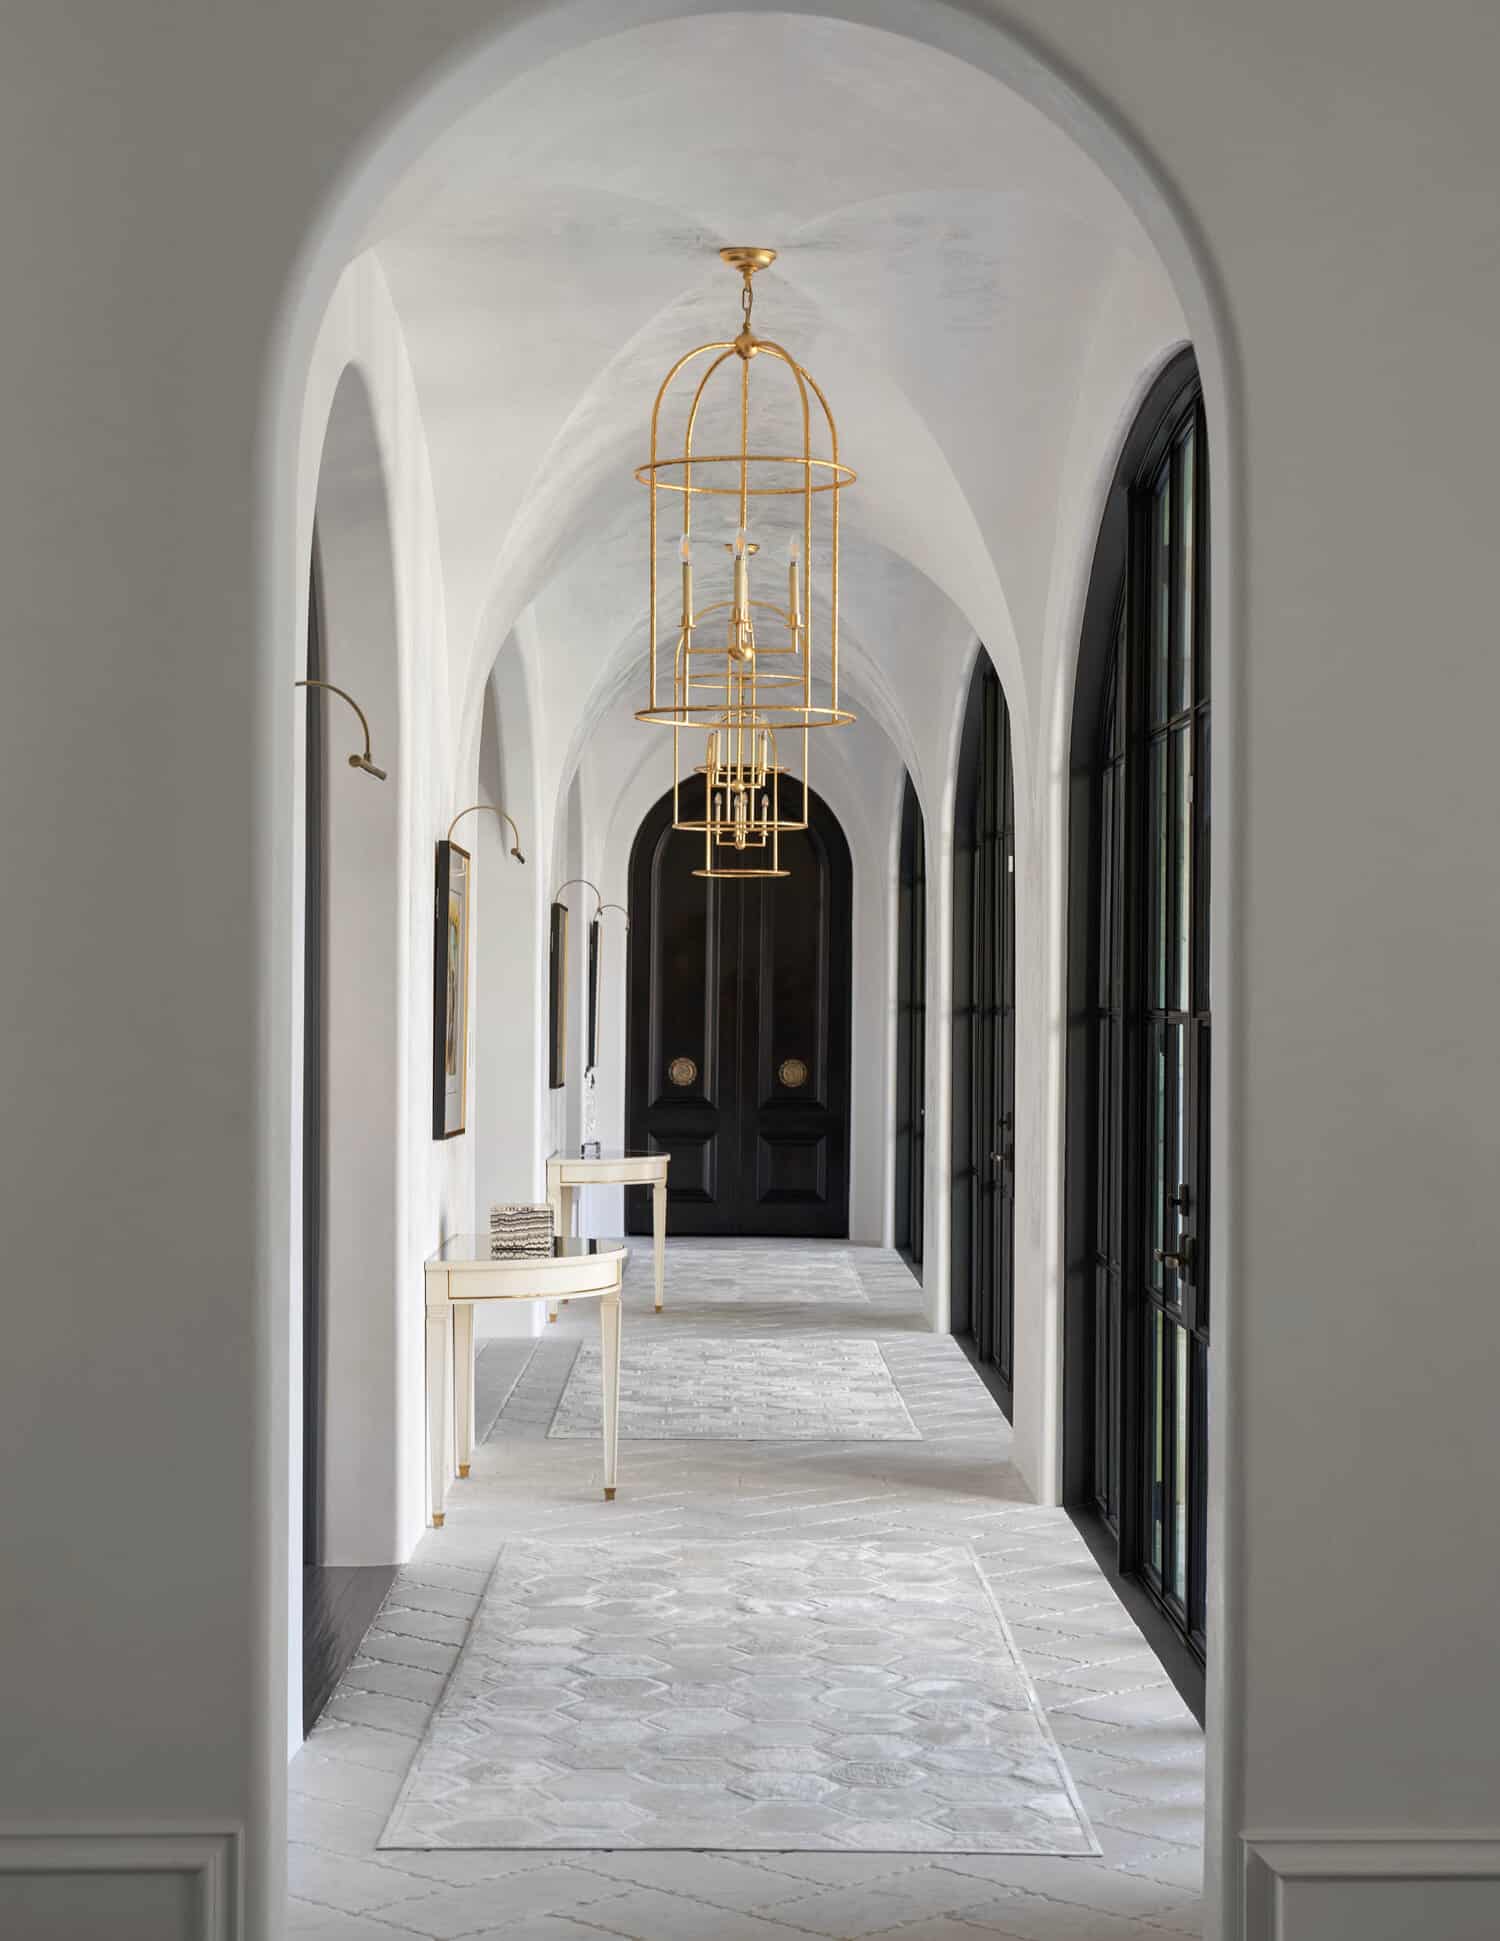 Entering a Jenkins Interiors designed space is akin to stepping into a realm where elegance meets timelessness. Their entrance halls serve as portals to a world of refined luxury, exquisite taste, and unequaled attention to detail. Nathan Schroder Photography